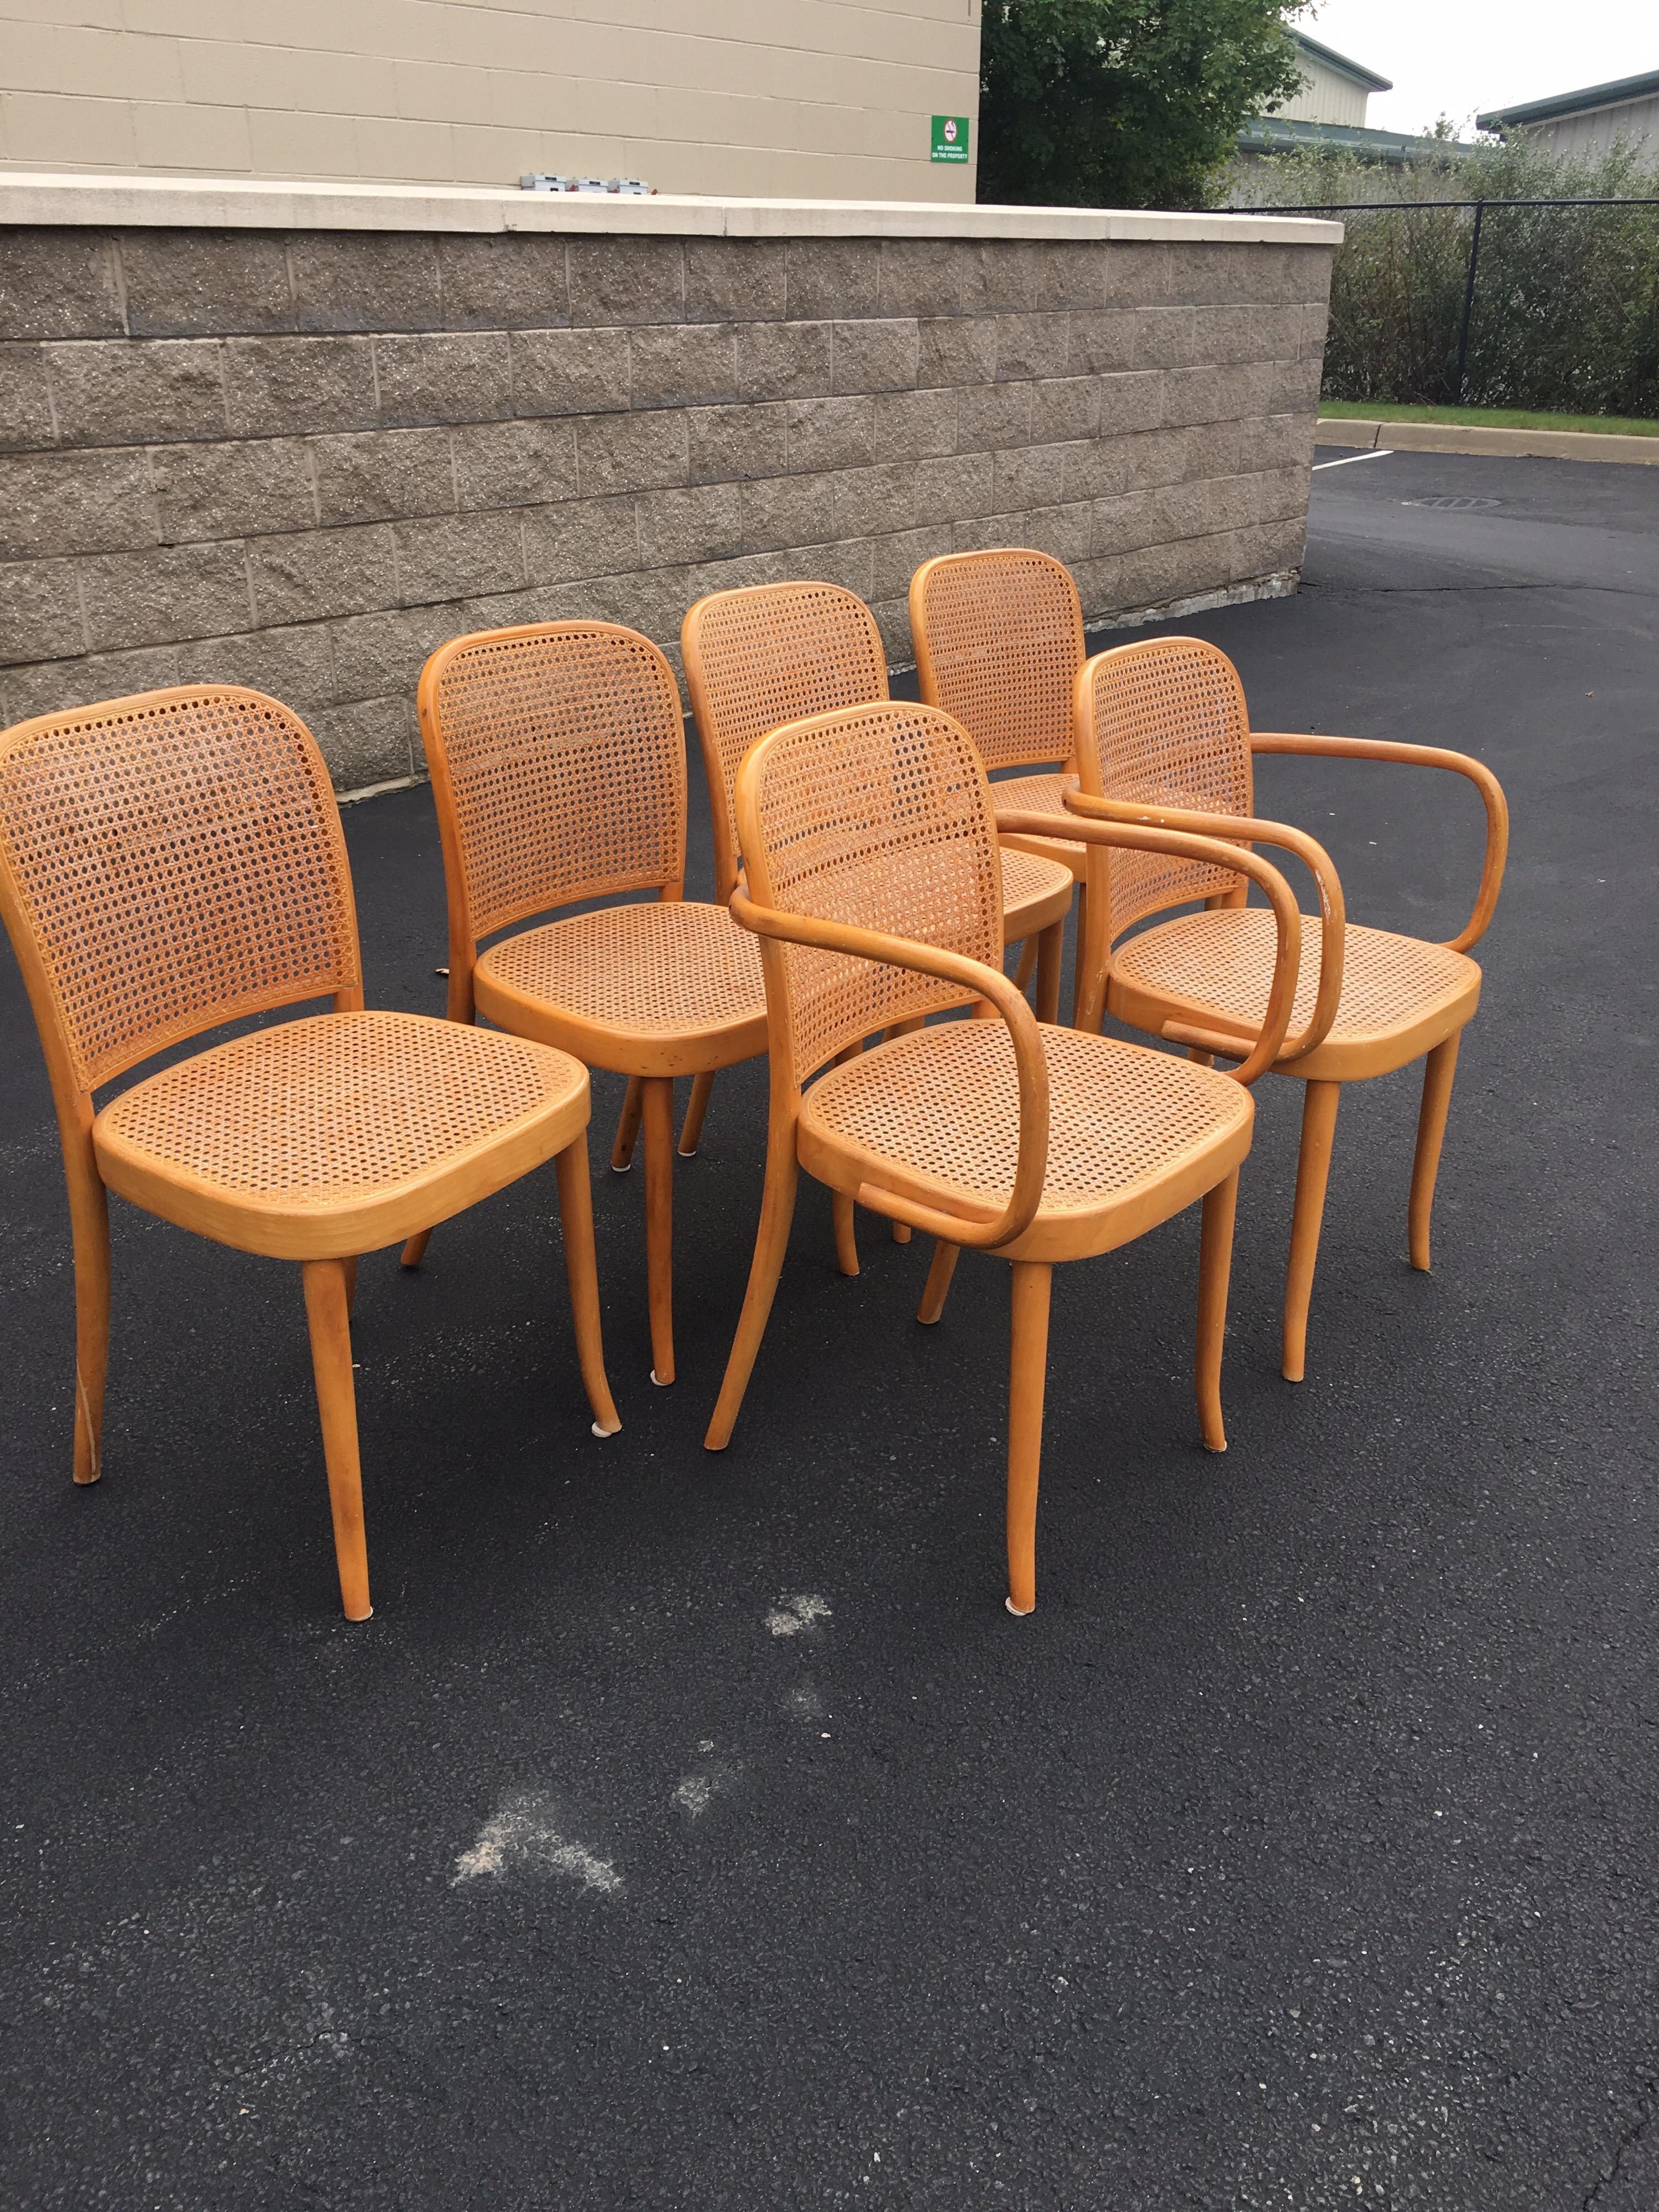 This set of six chairs (4 side and 2 arm chairs), were produced in Italy by Salvatore Leone in the early 20th century. They are made from stained bentwood with caned seats and backs. An exquisite example of fine Italian Craftsmanship very much in